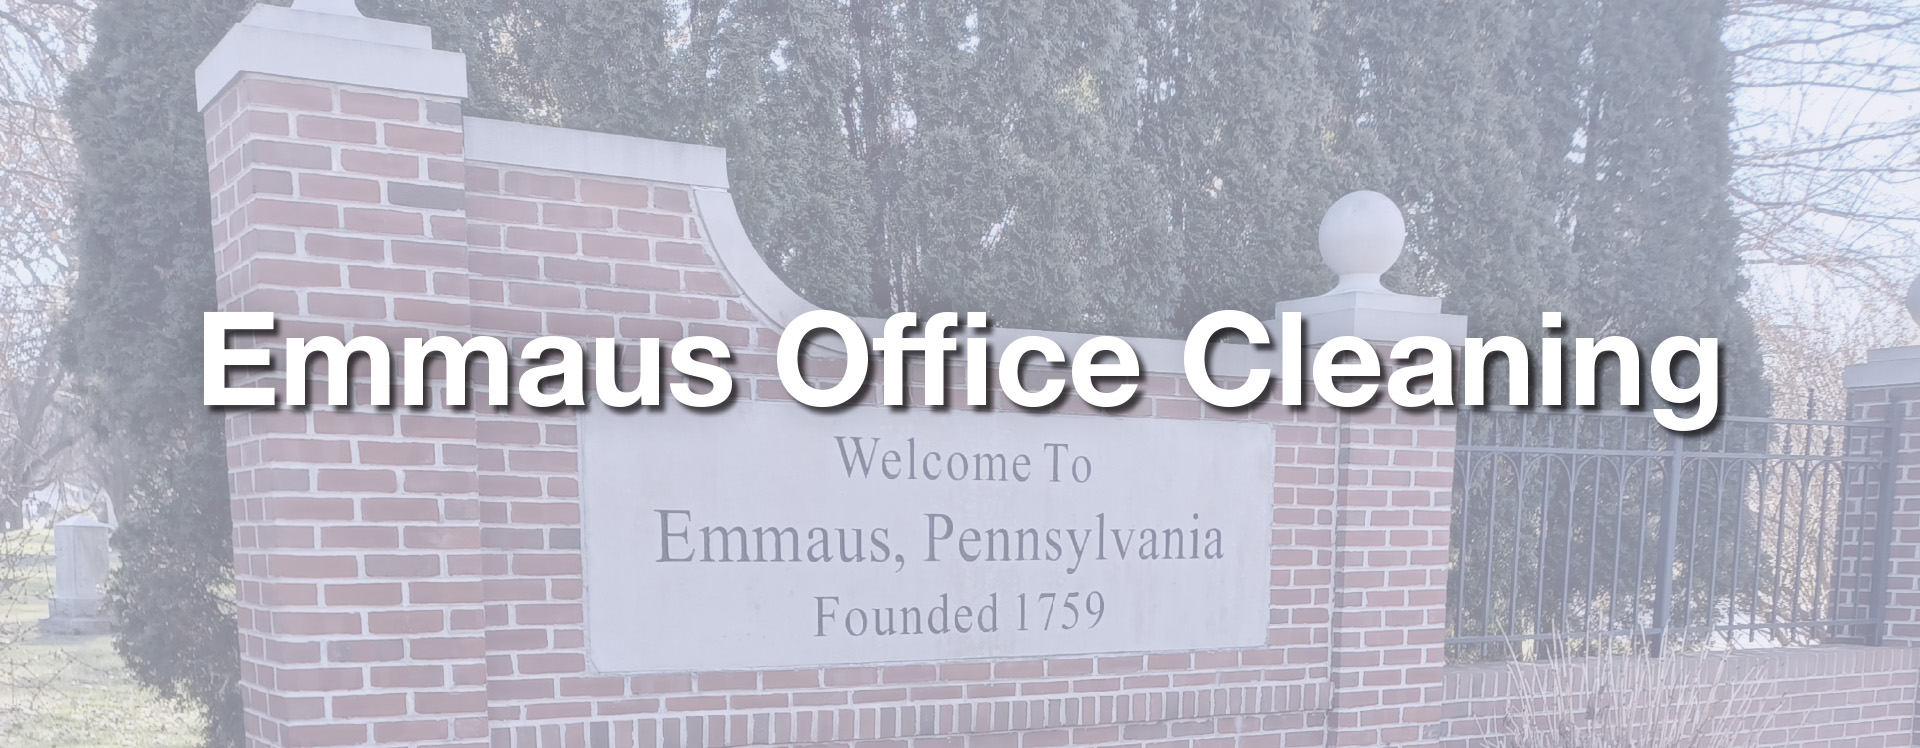 Emmaus Office Cleaning